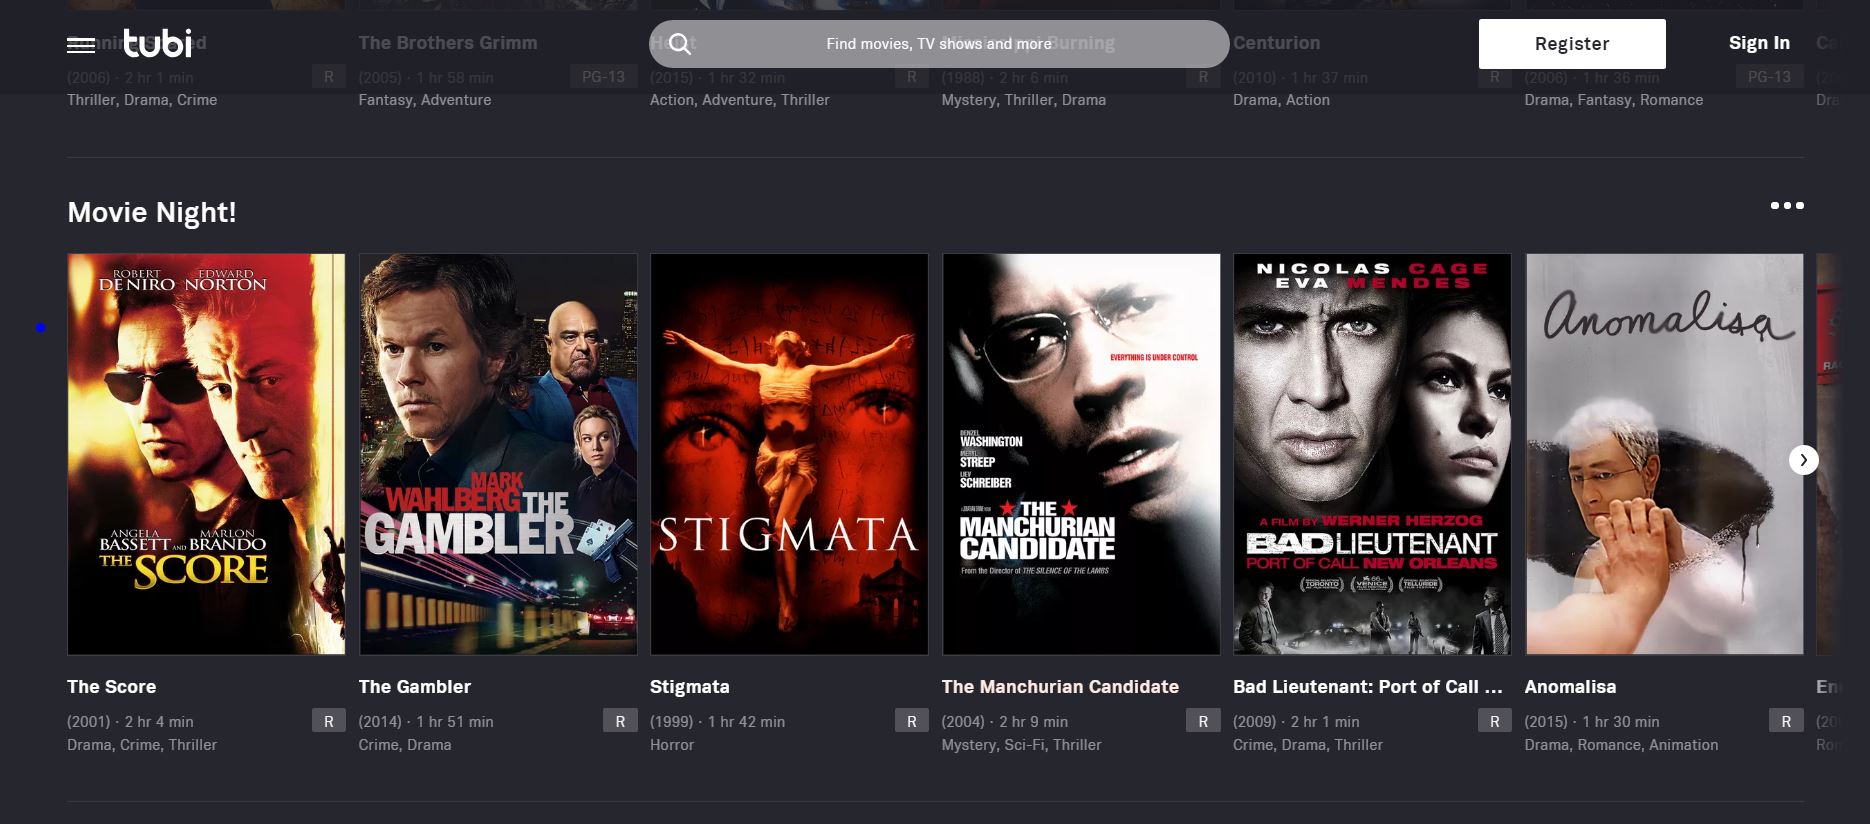 Tubi tv website showing posters and titles of different movies